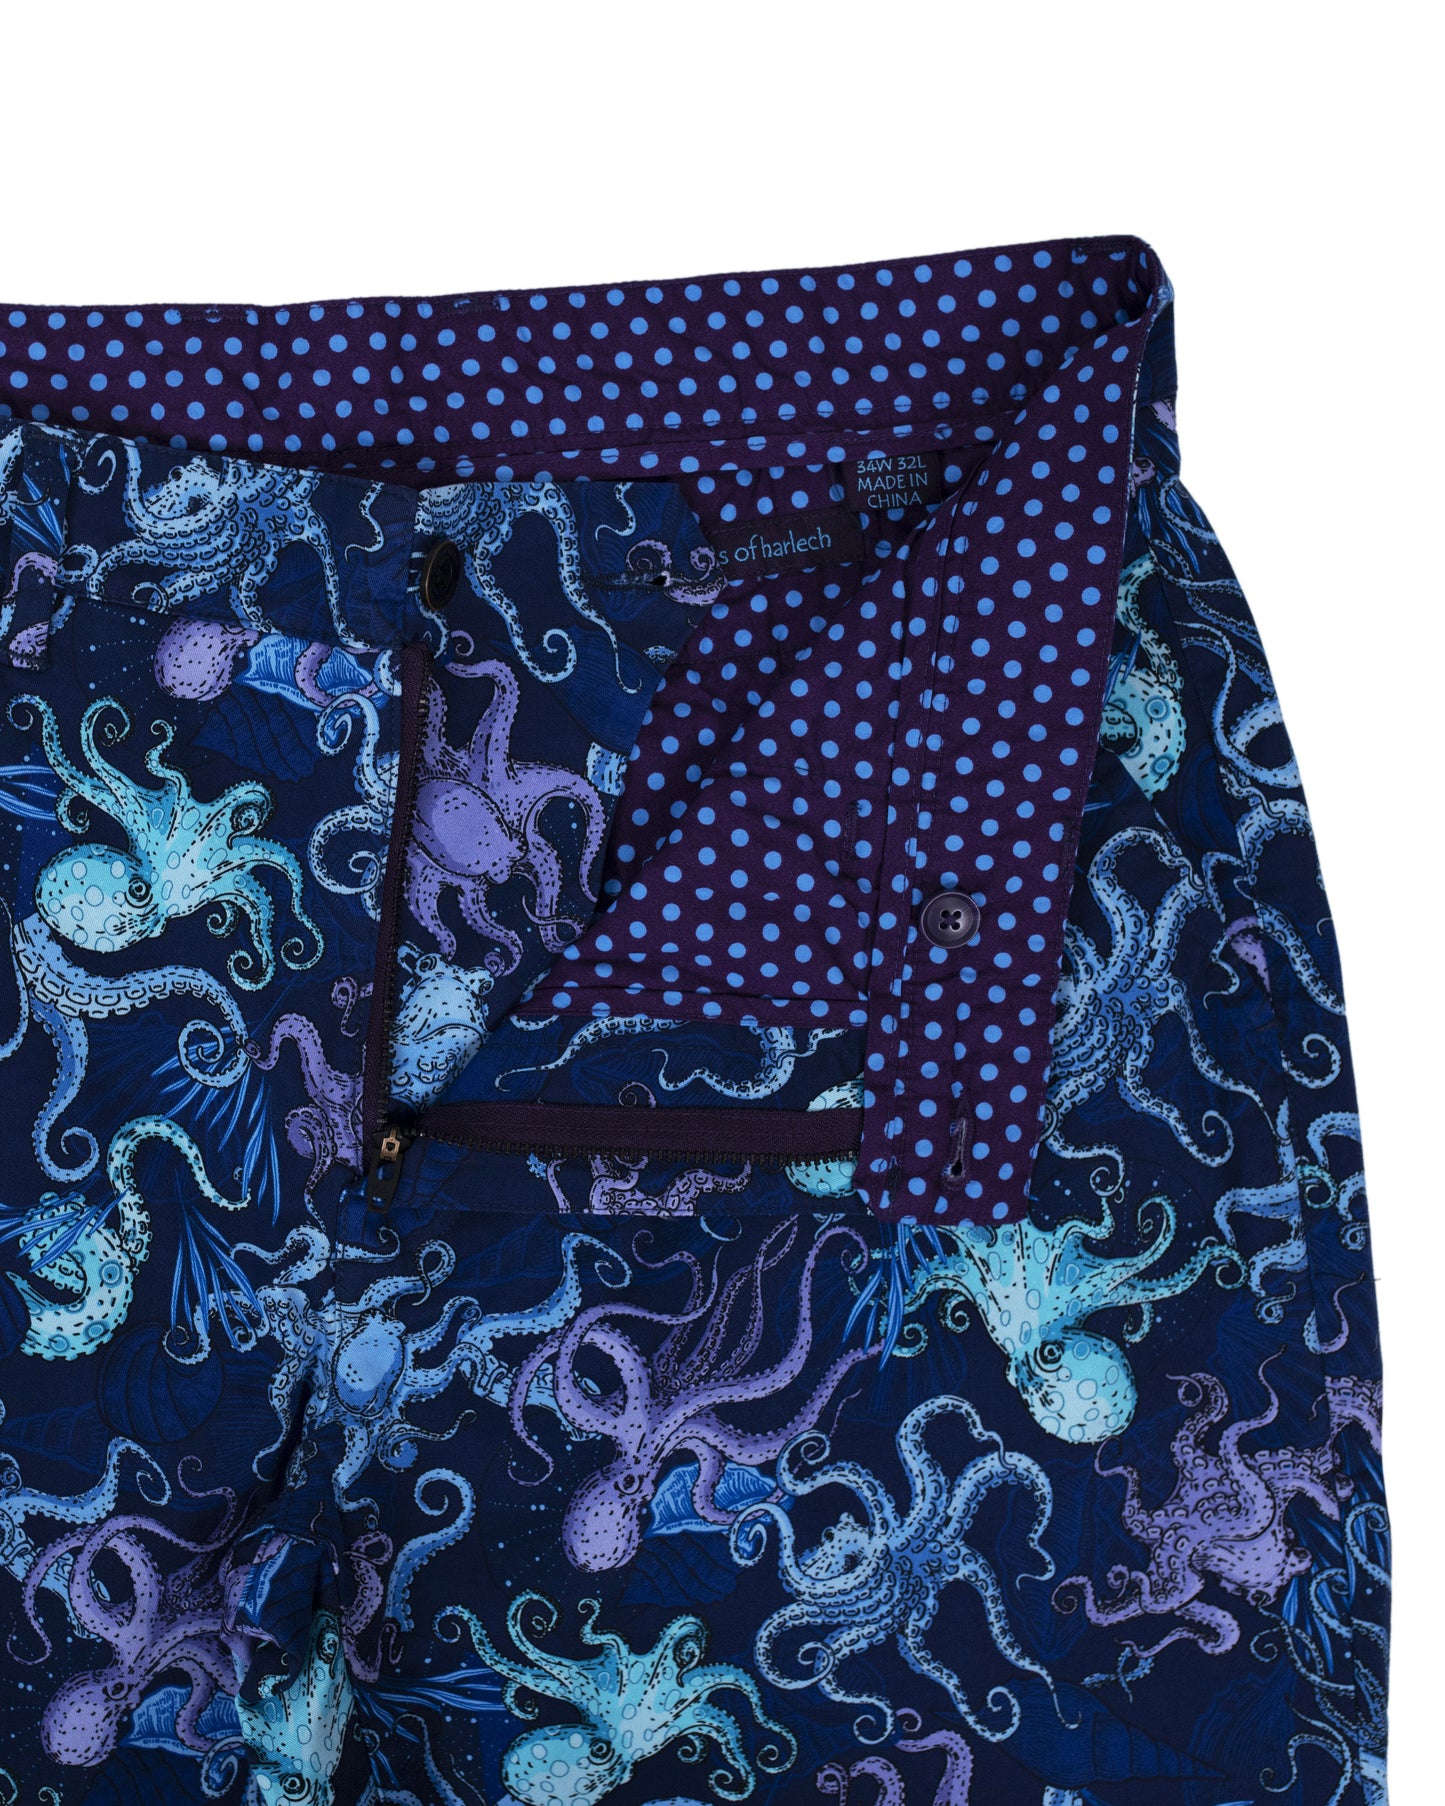 CHARLES OCTOPUS PARTY PANTS IN NAVY